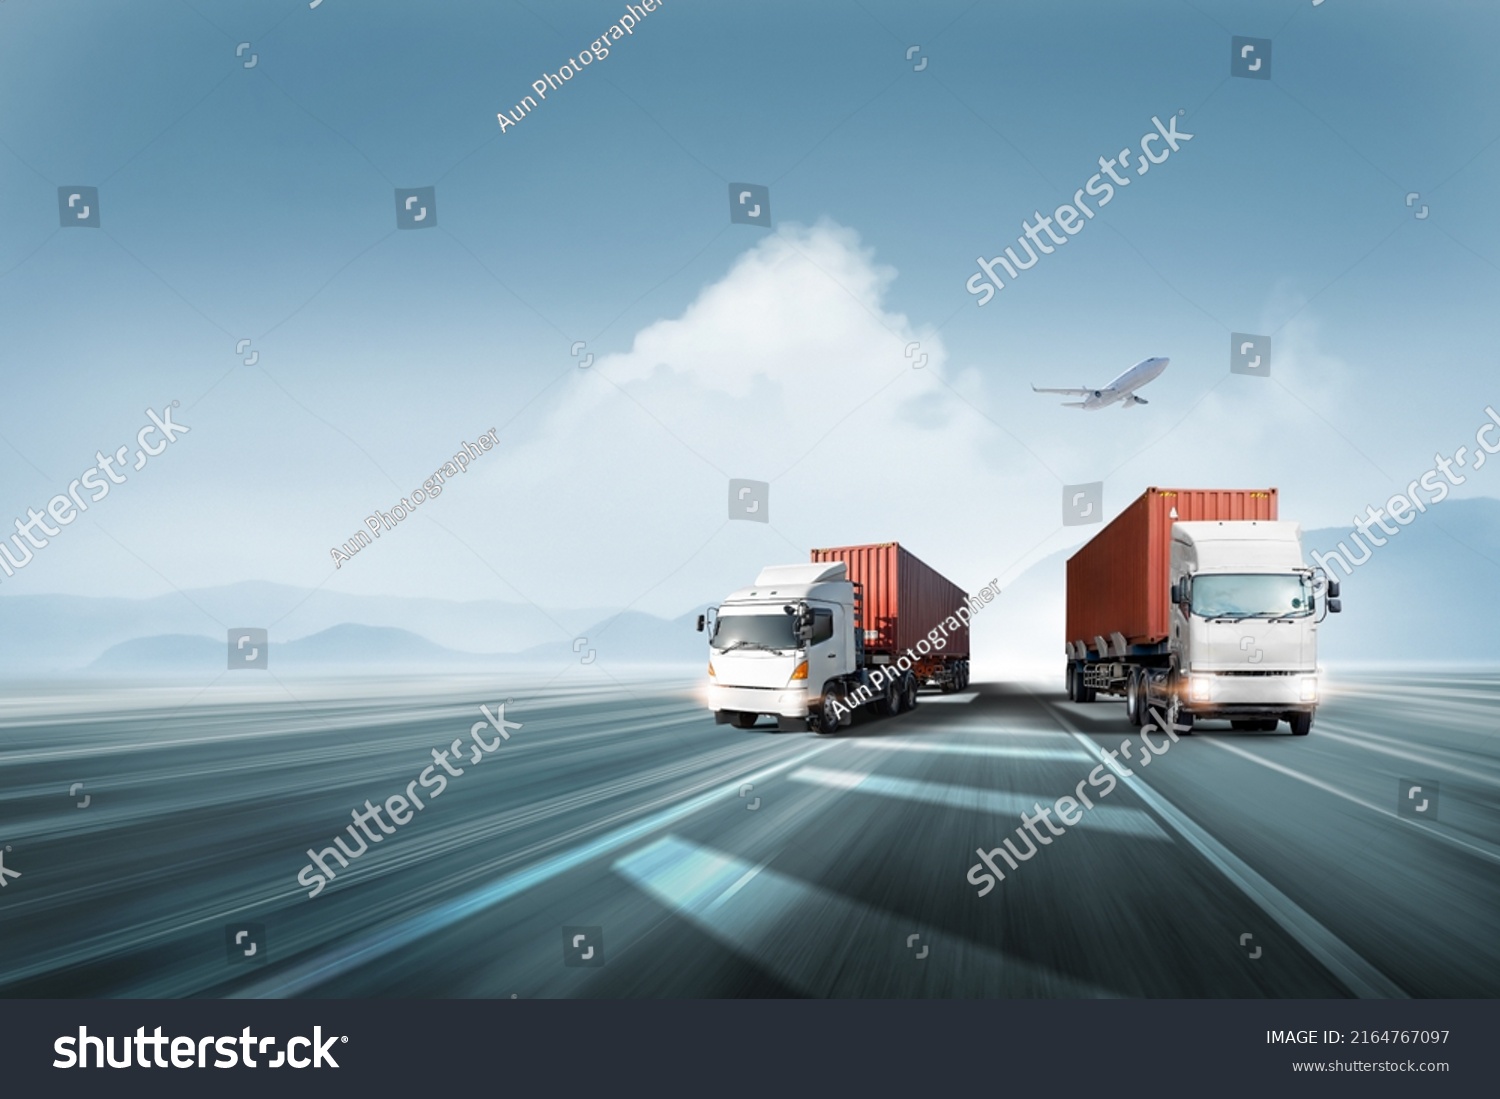 Logistics import export and cargo transportation industry concept of Container Truck run on highway road at sunset blue sky background with copy space, cargo airplane, moving by motion blur effect #2164767097